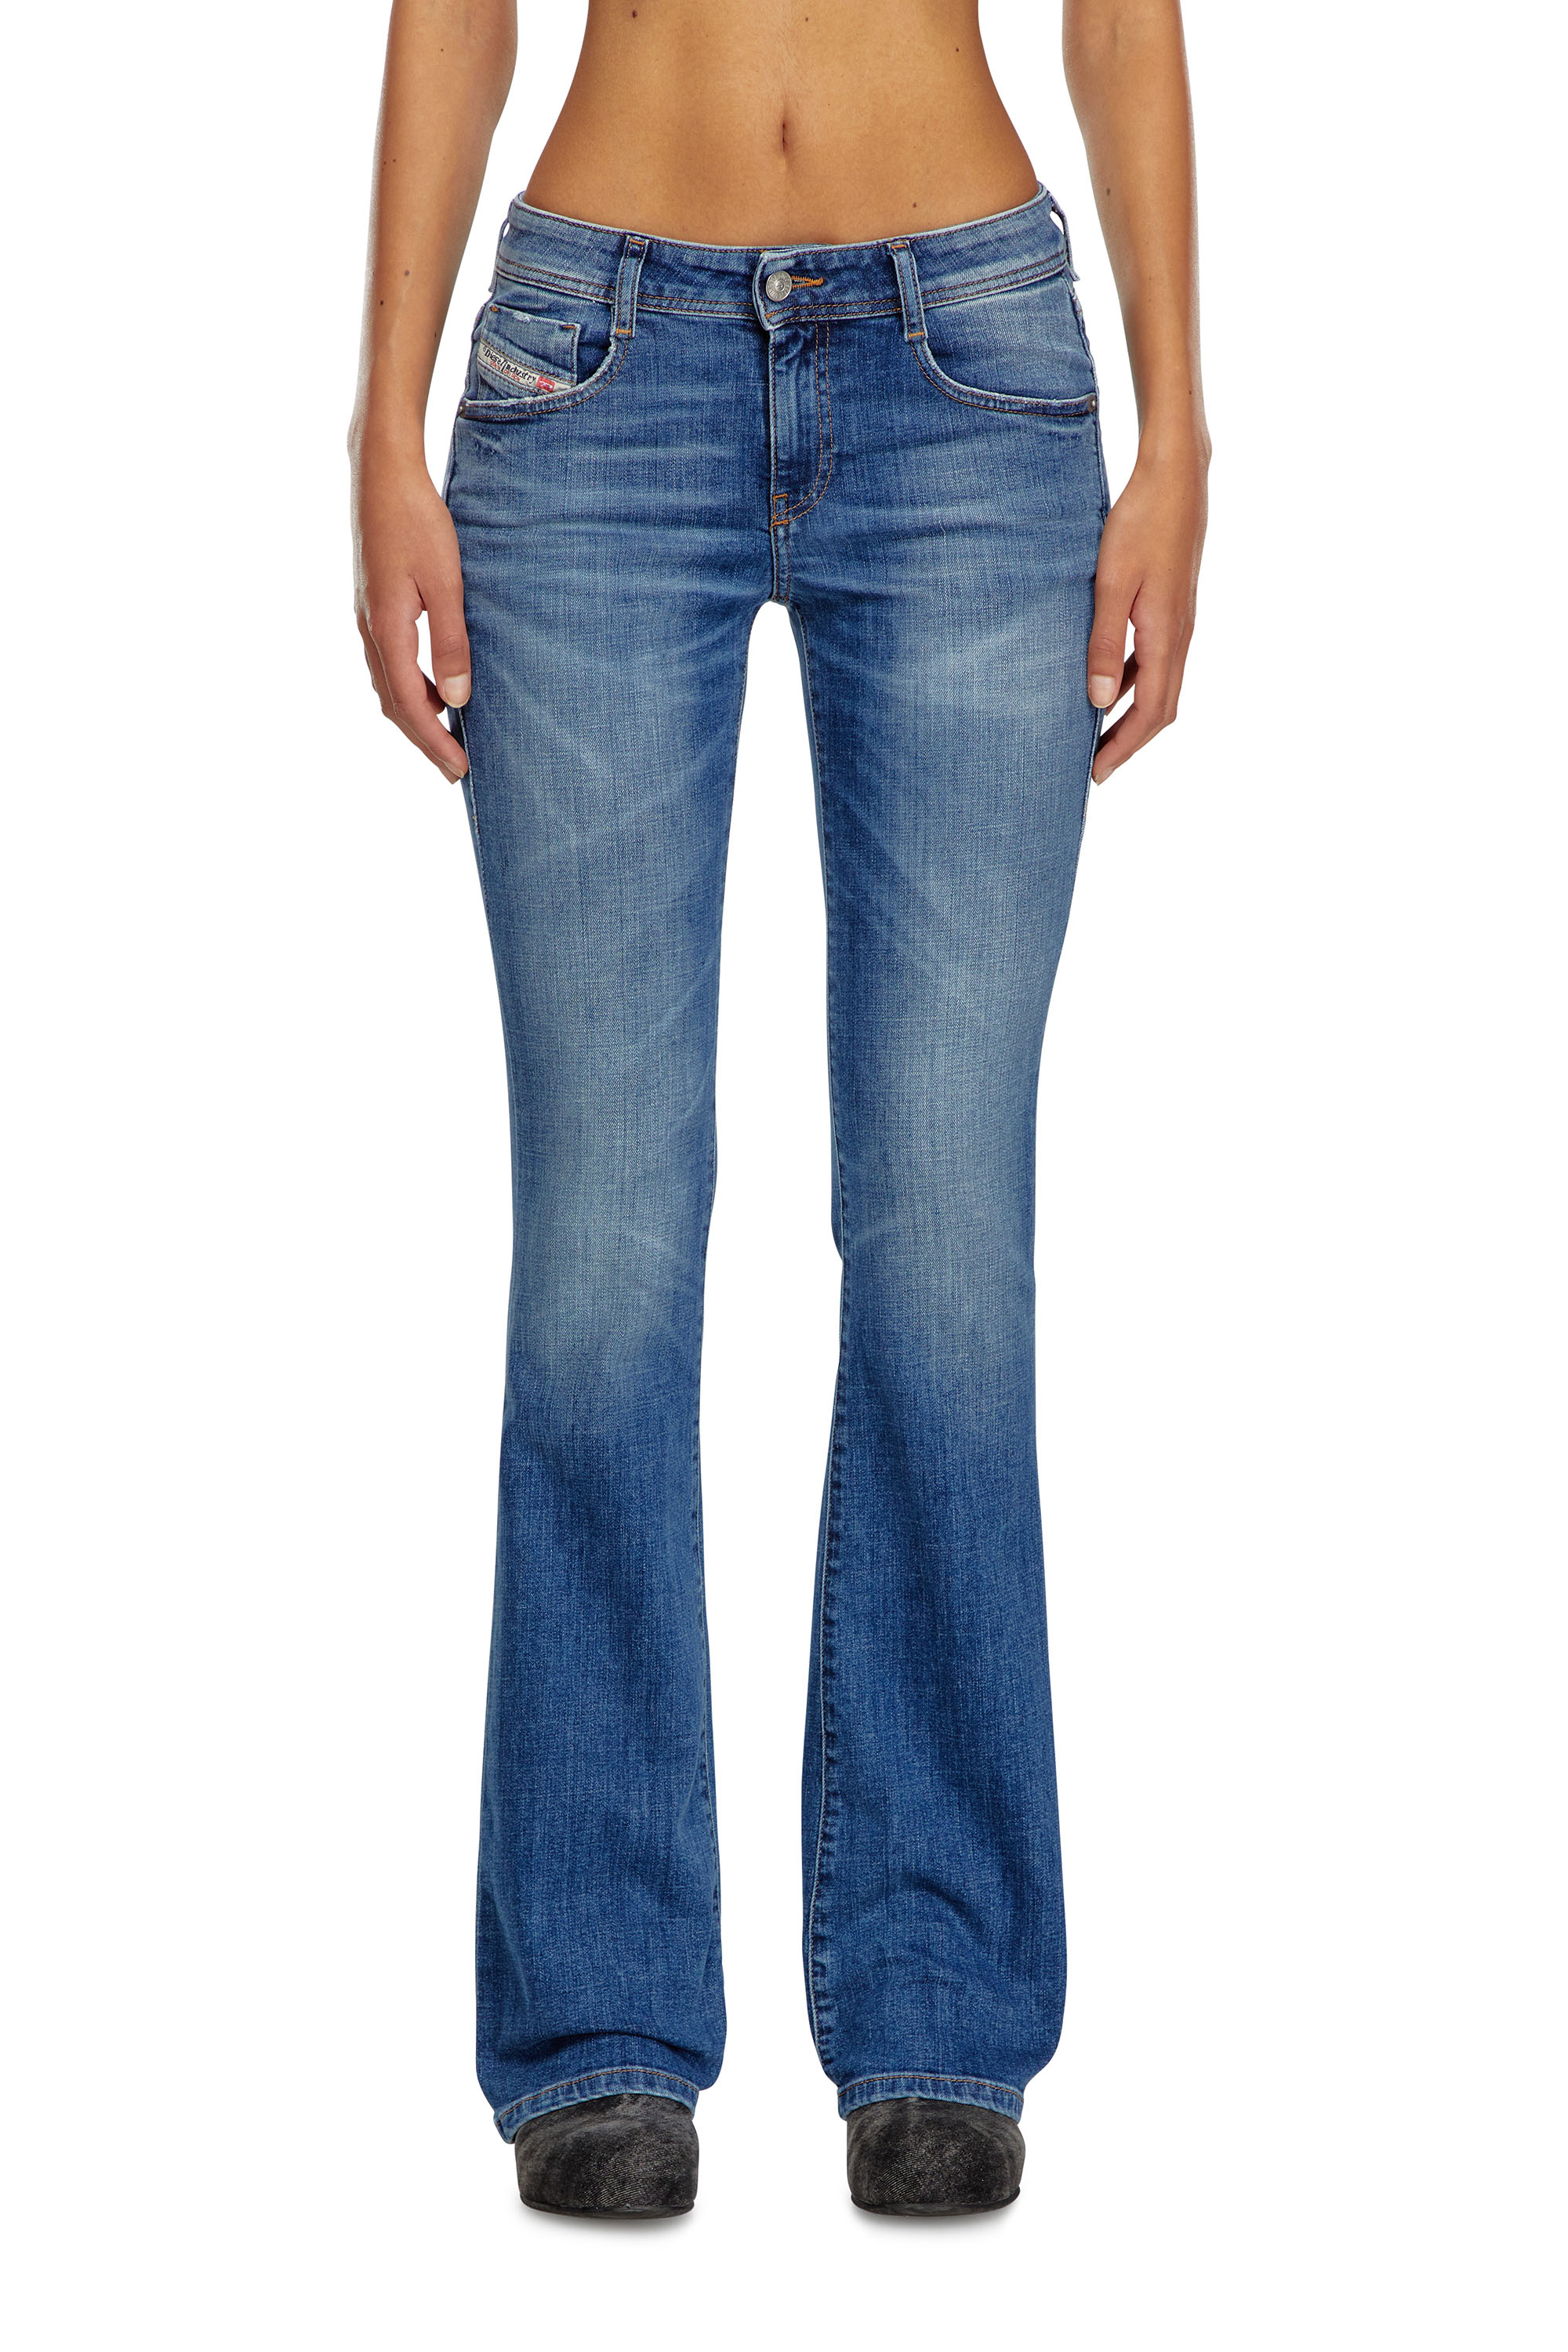 Diesel - Bootcut and Flare Jeans 1969 D-Ebbey 09J33, Mujer Bootcut y Flare Jeans - 1969 D-Ebbey in Azul marino - Image 2